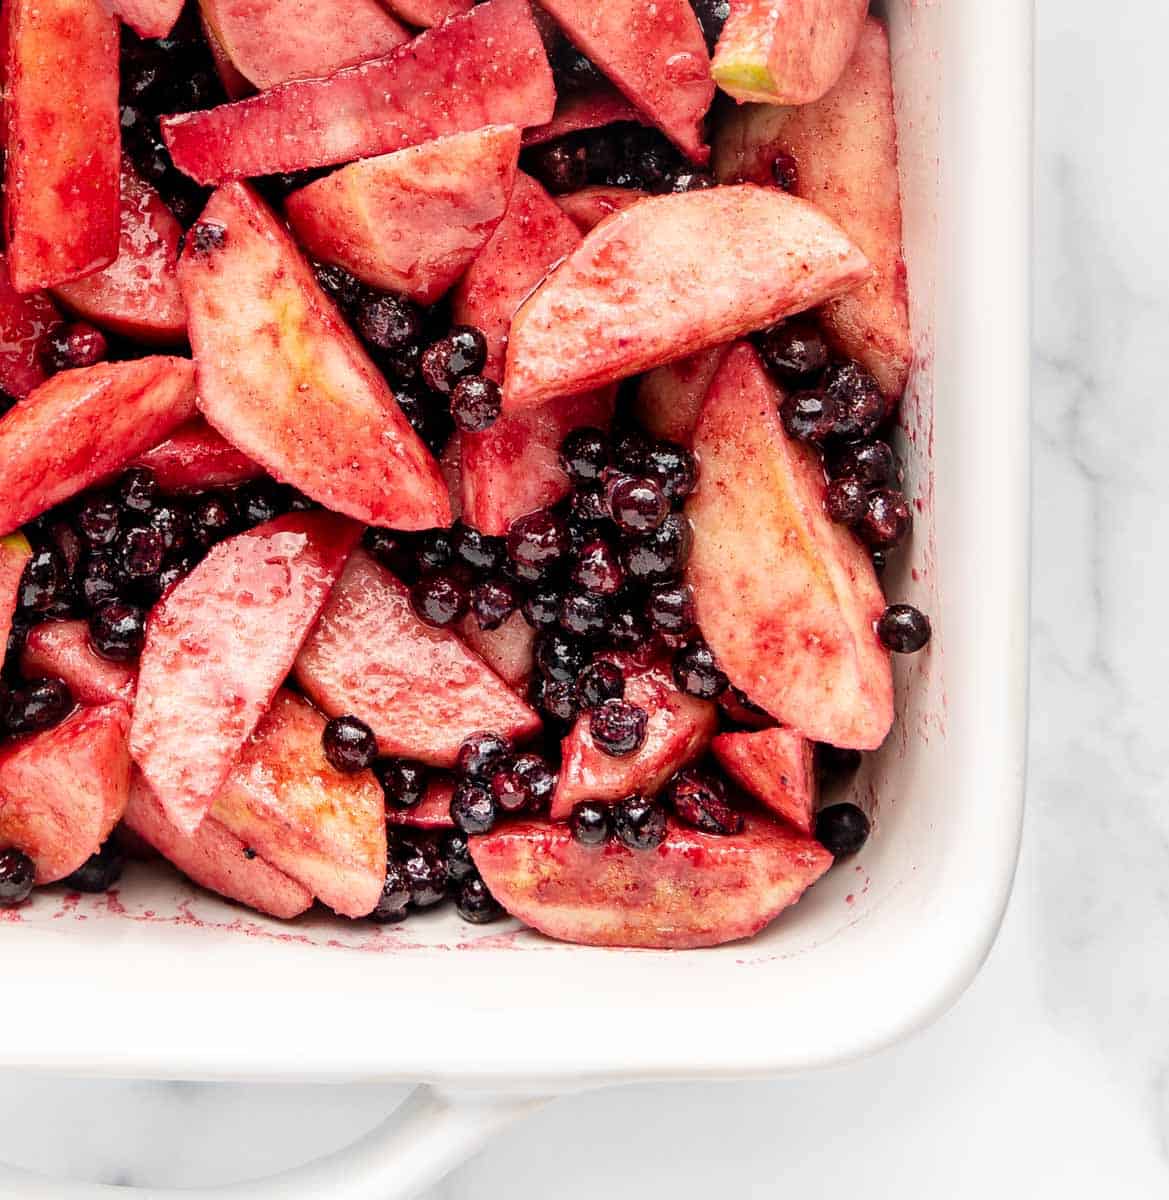 Apples and blueberries in a baking dish